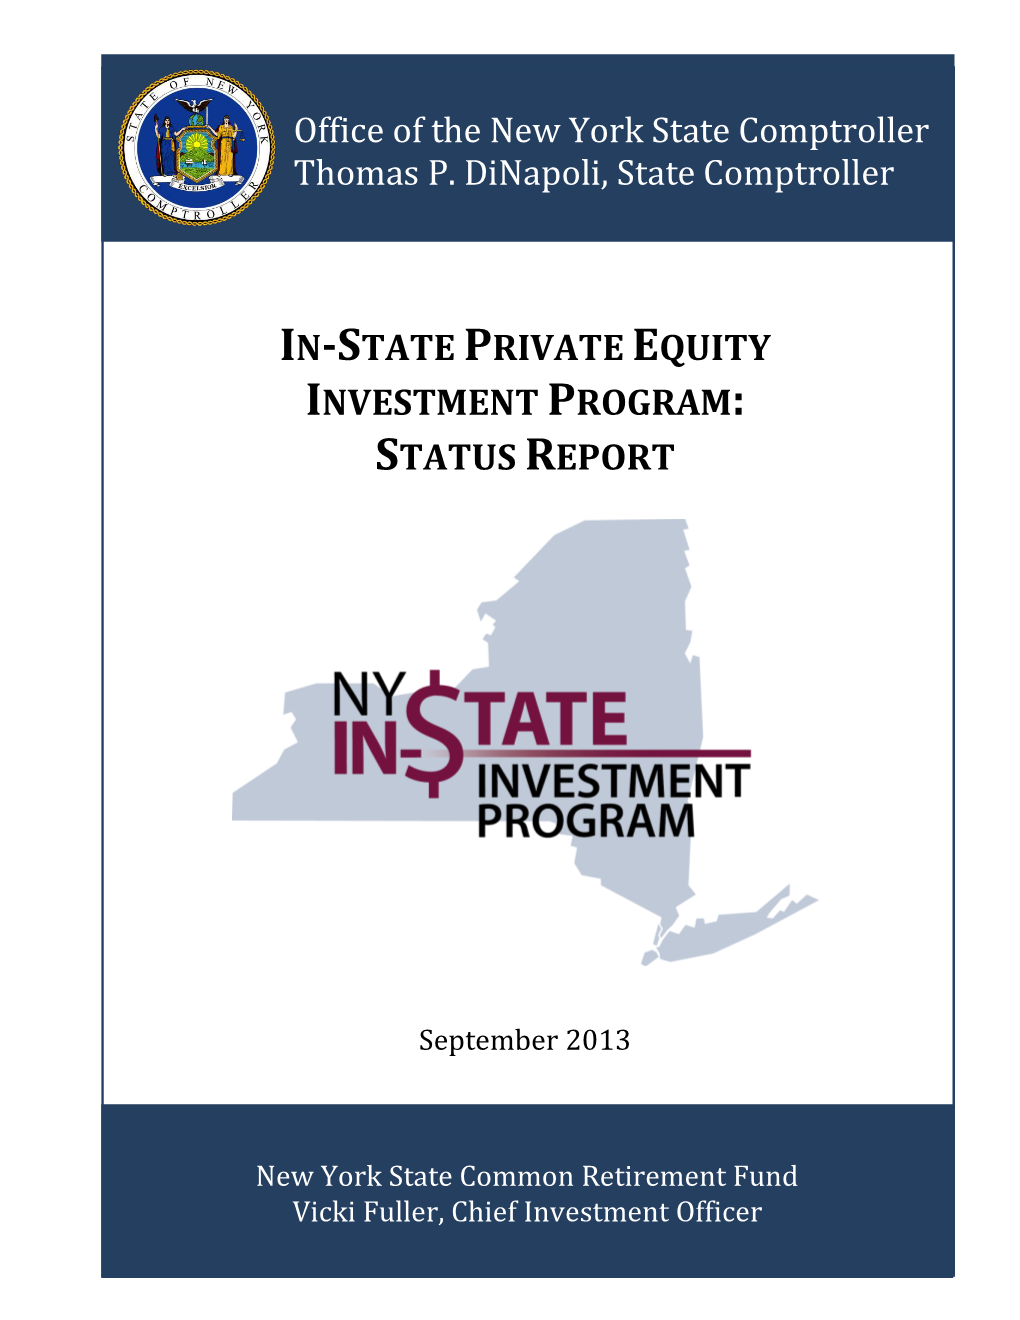 In-State Private Equity Investment Program: Status Report